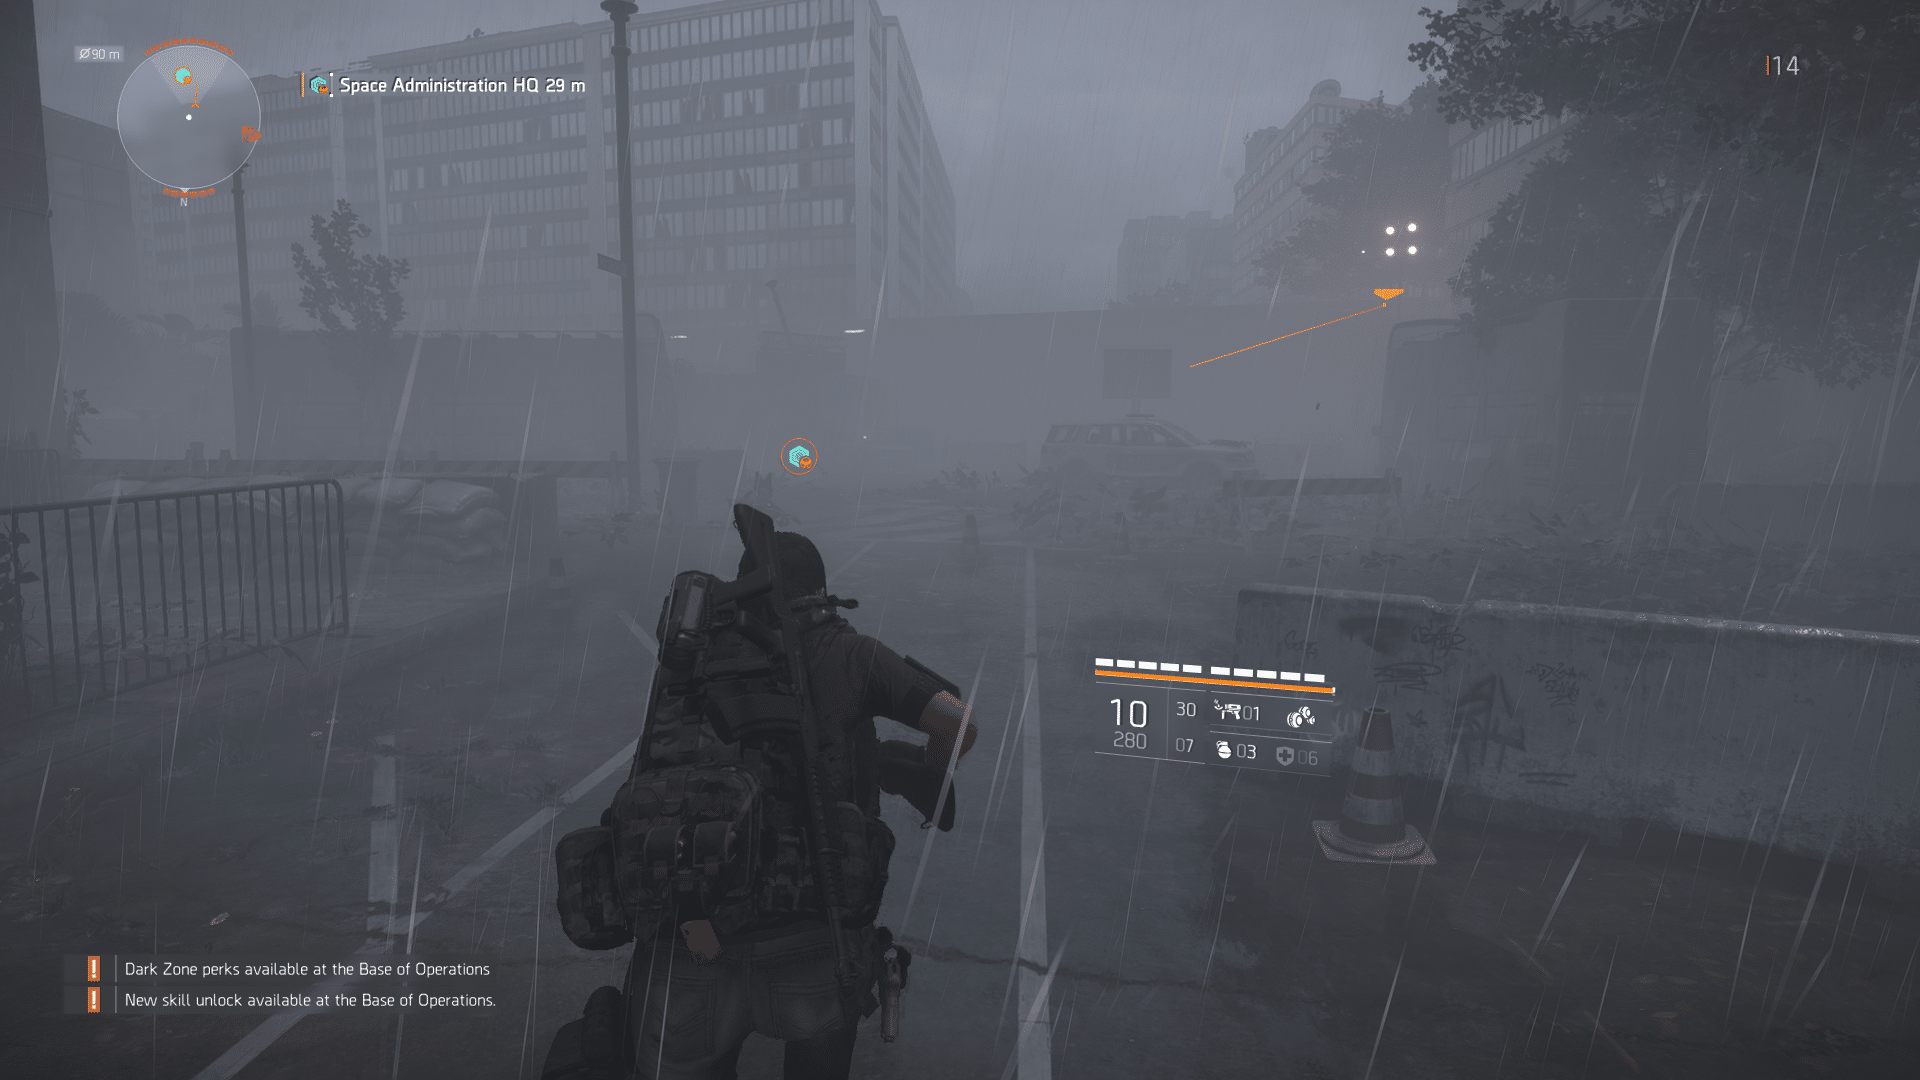 TheDivision2 4 1 2019 8 53 55 PM 571